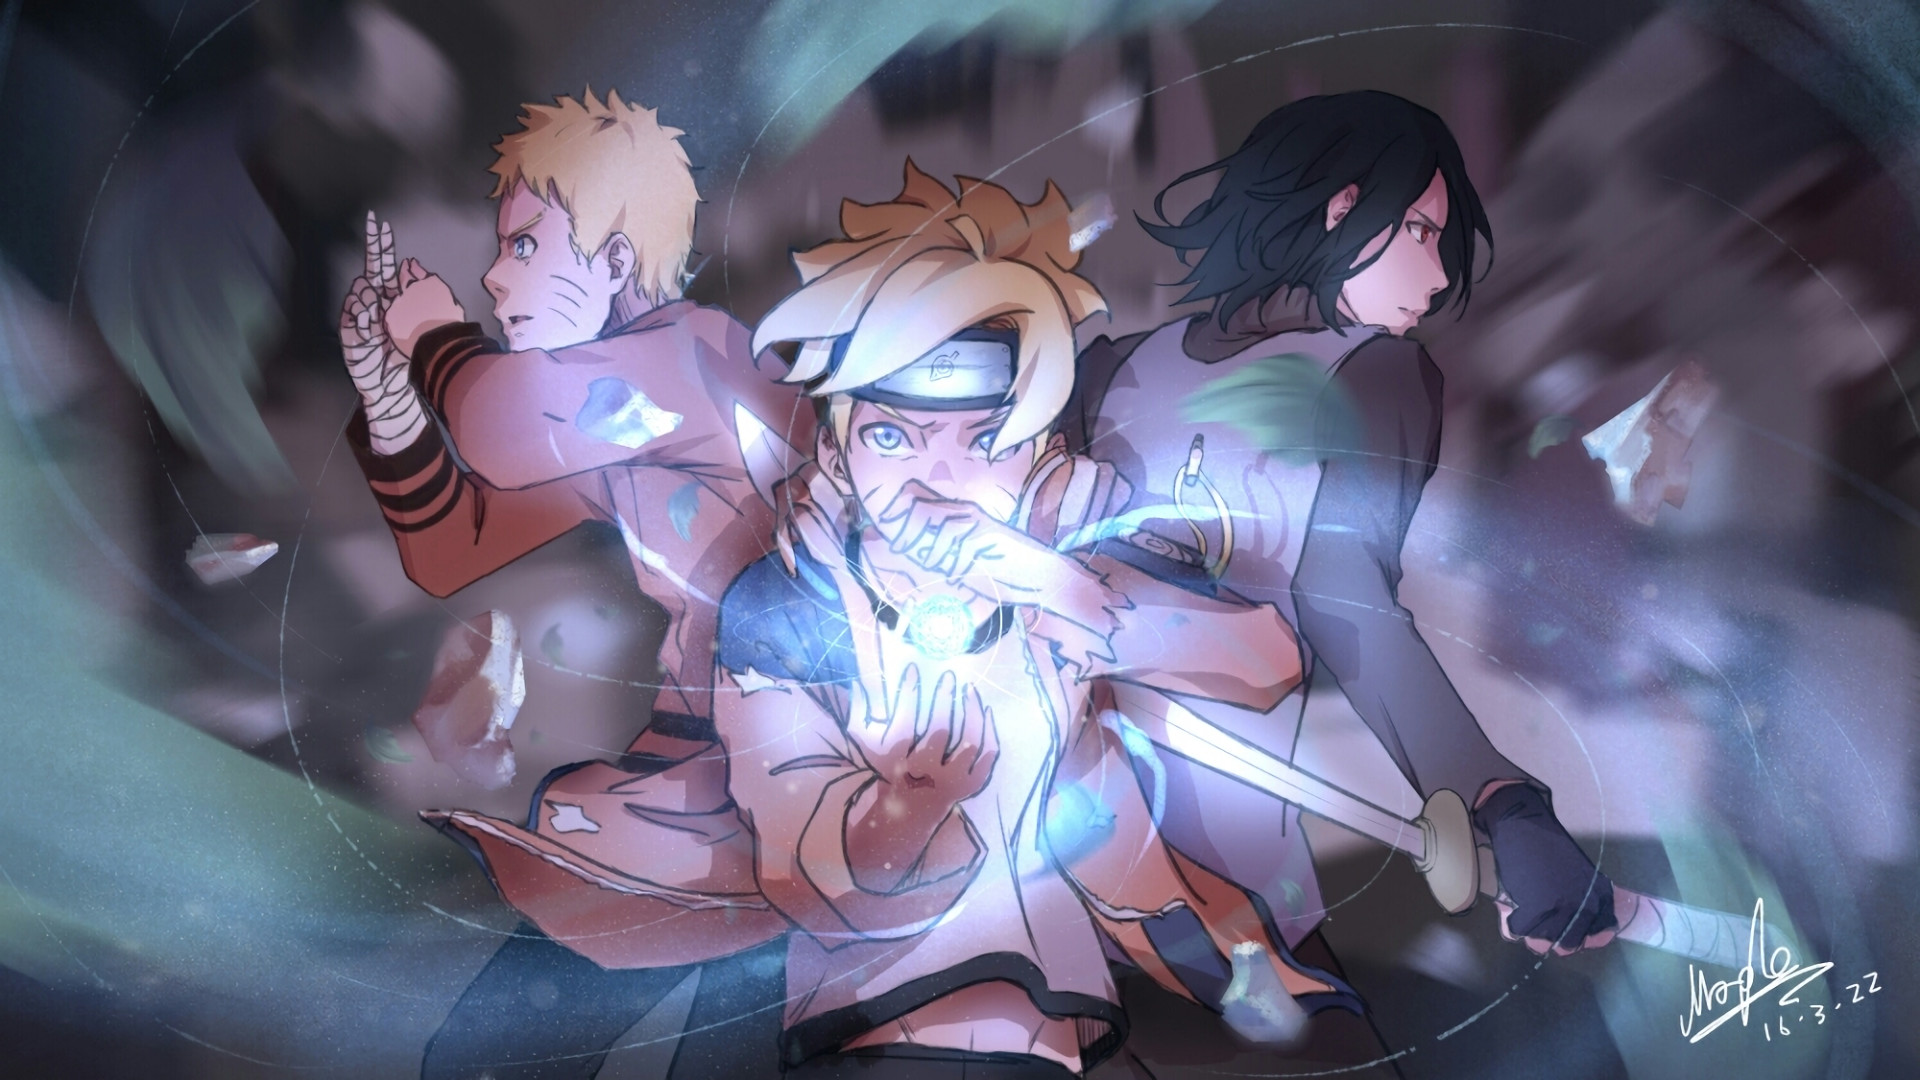 Explore More Wallpapers in the Boruto Subcategory